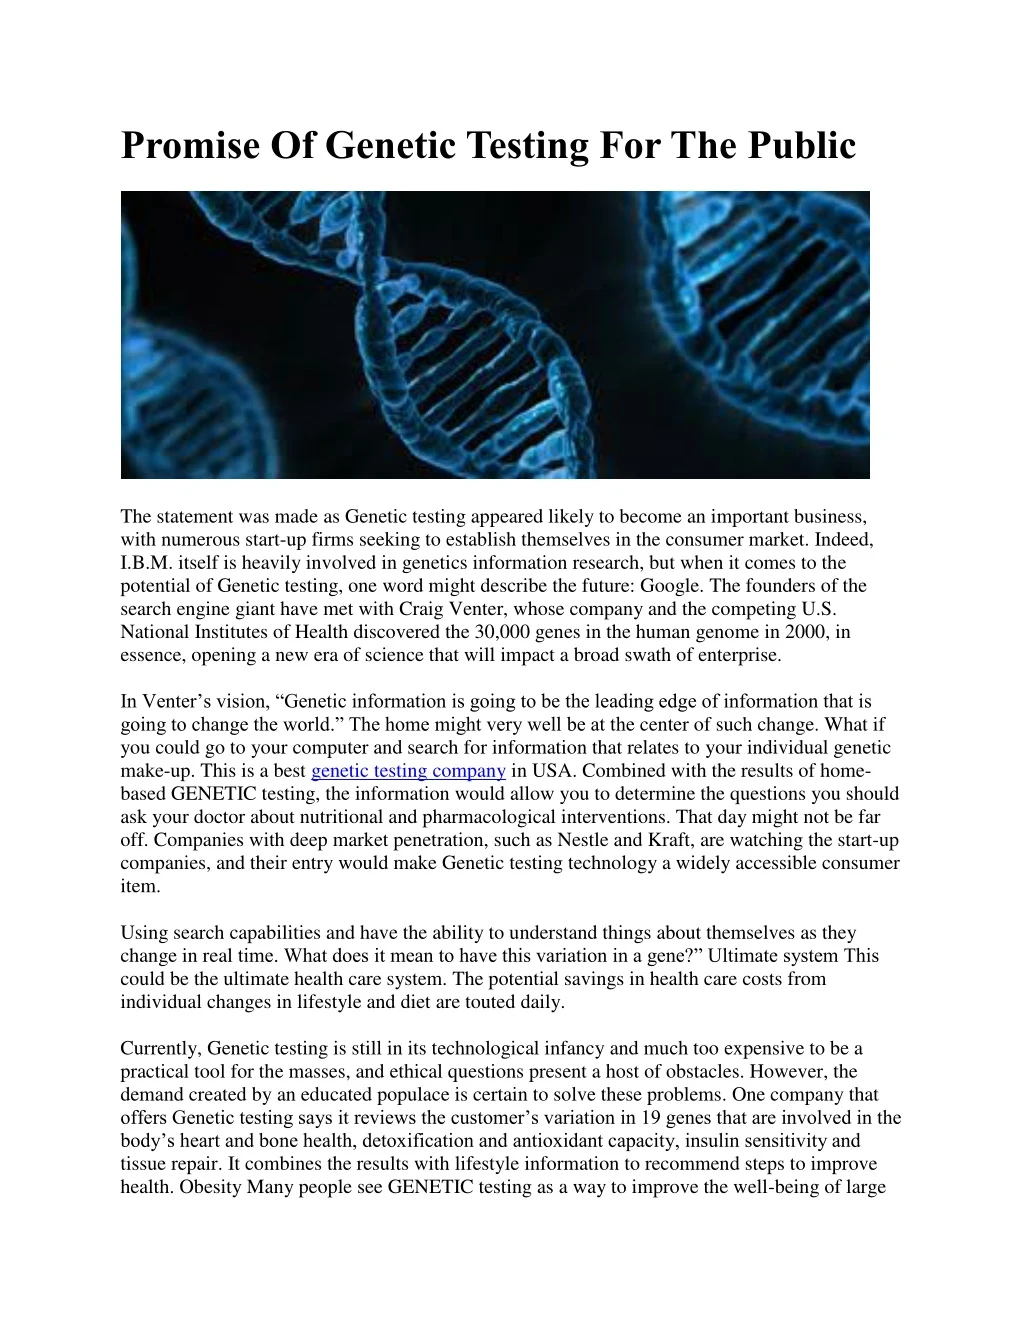 promise of genetic testing for the public